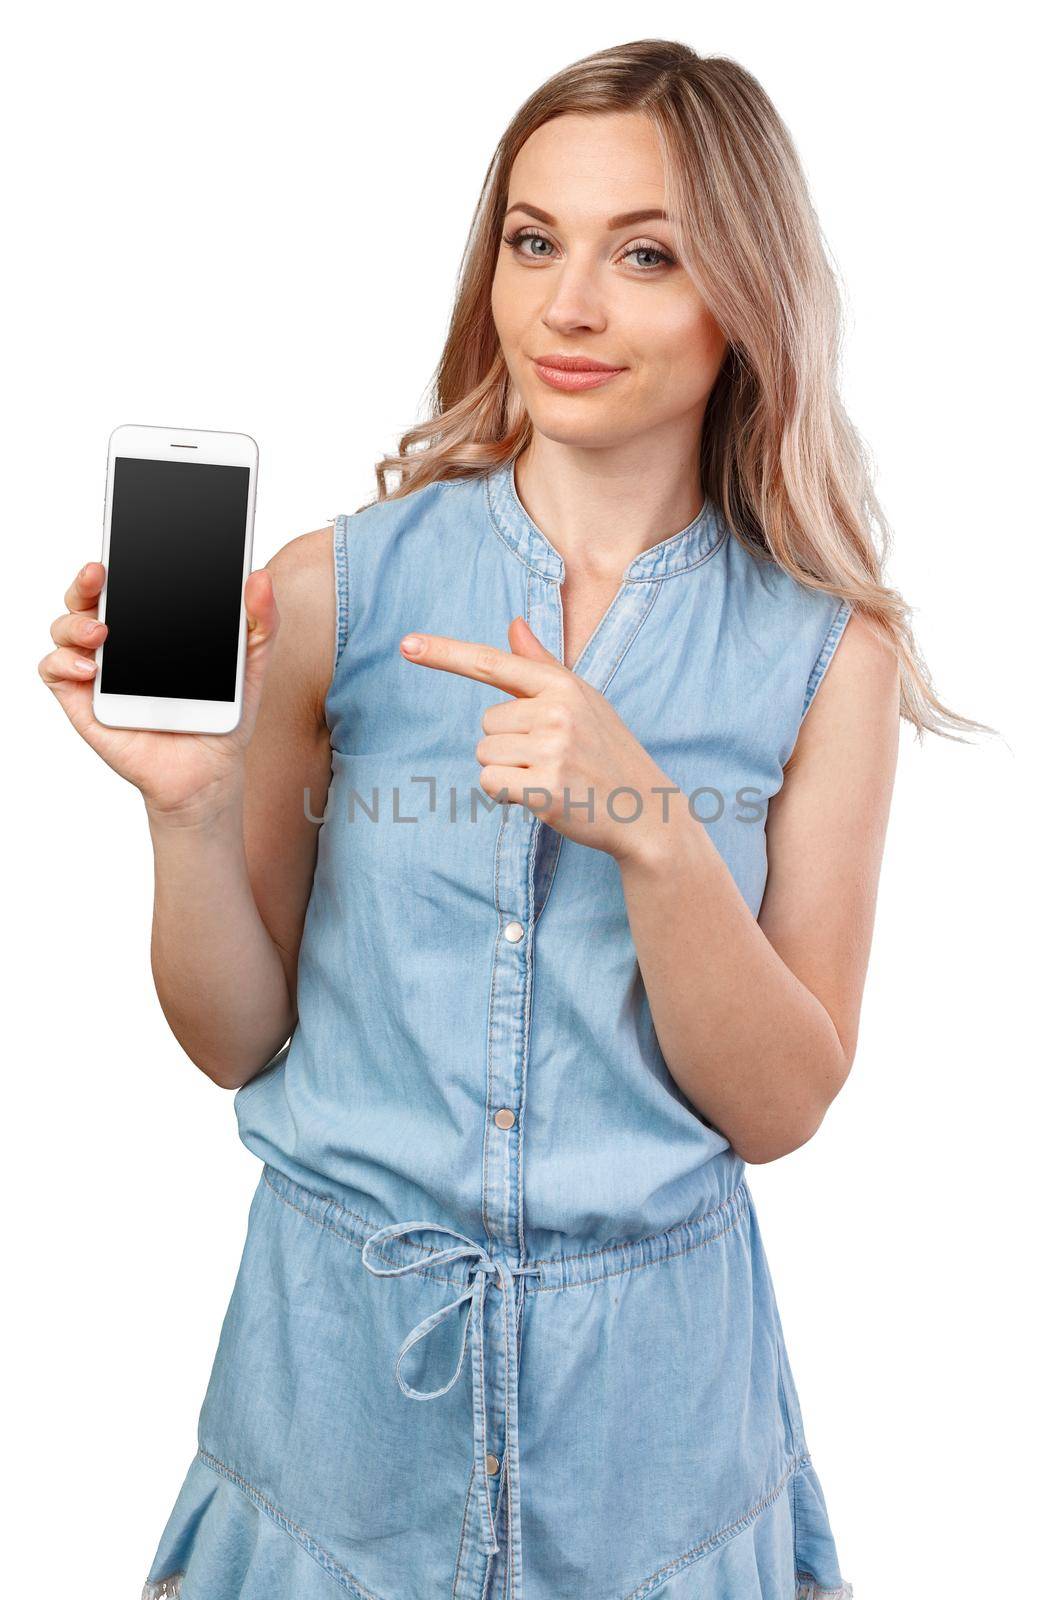 Portrait of a smiling woman showing blank smartphone screen isolated on a white background, close up